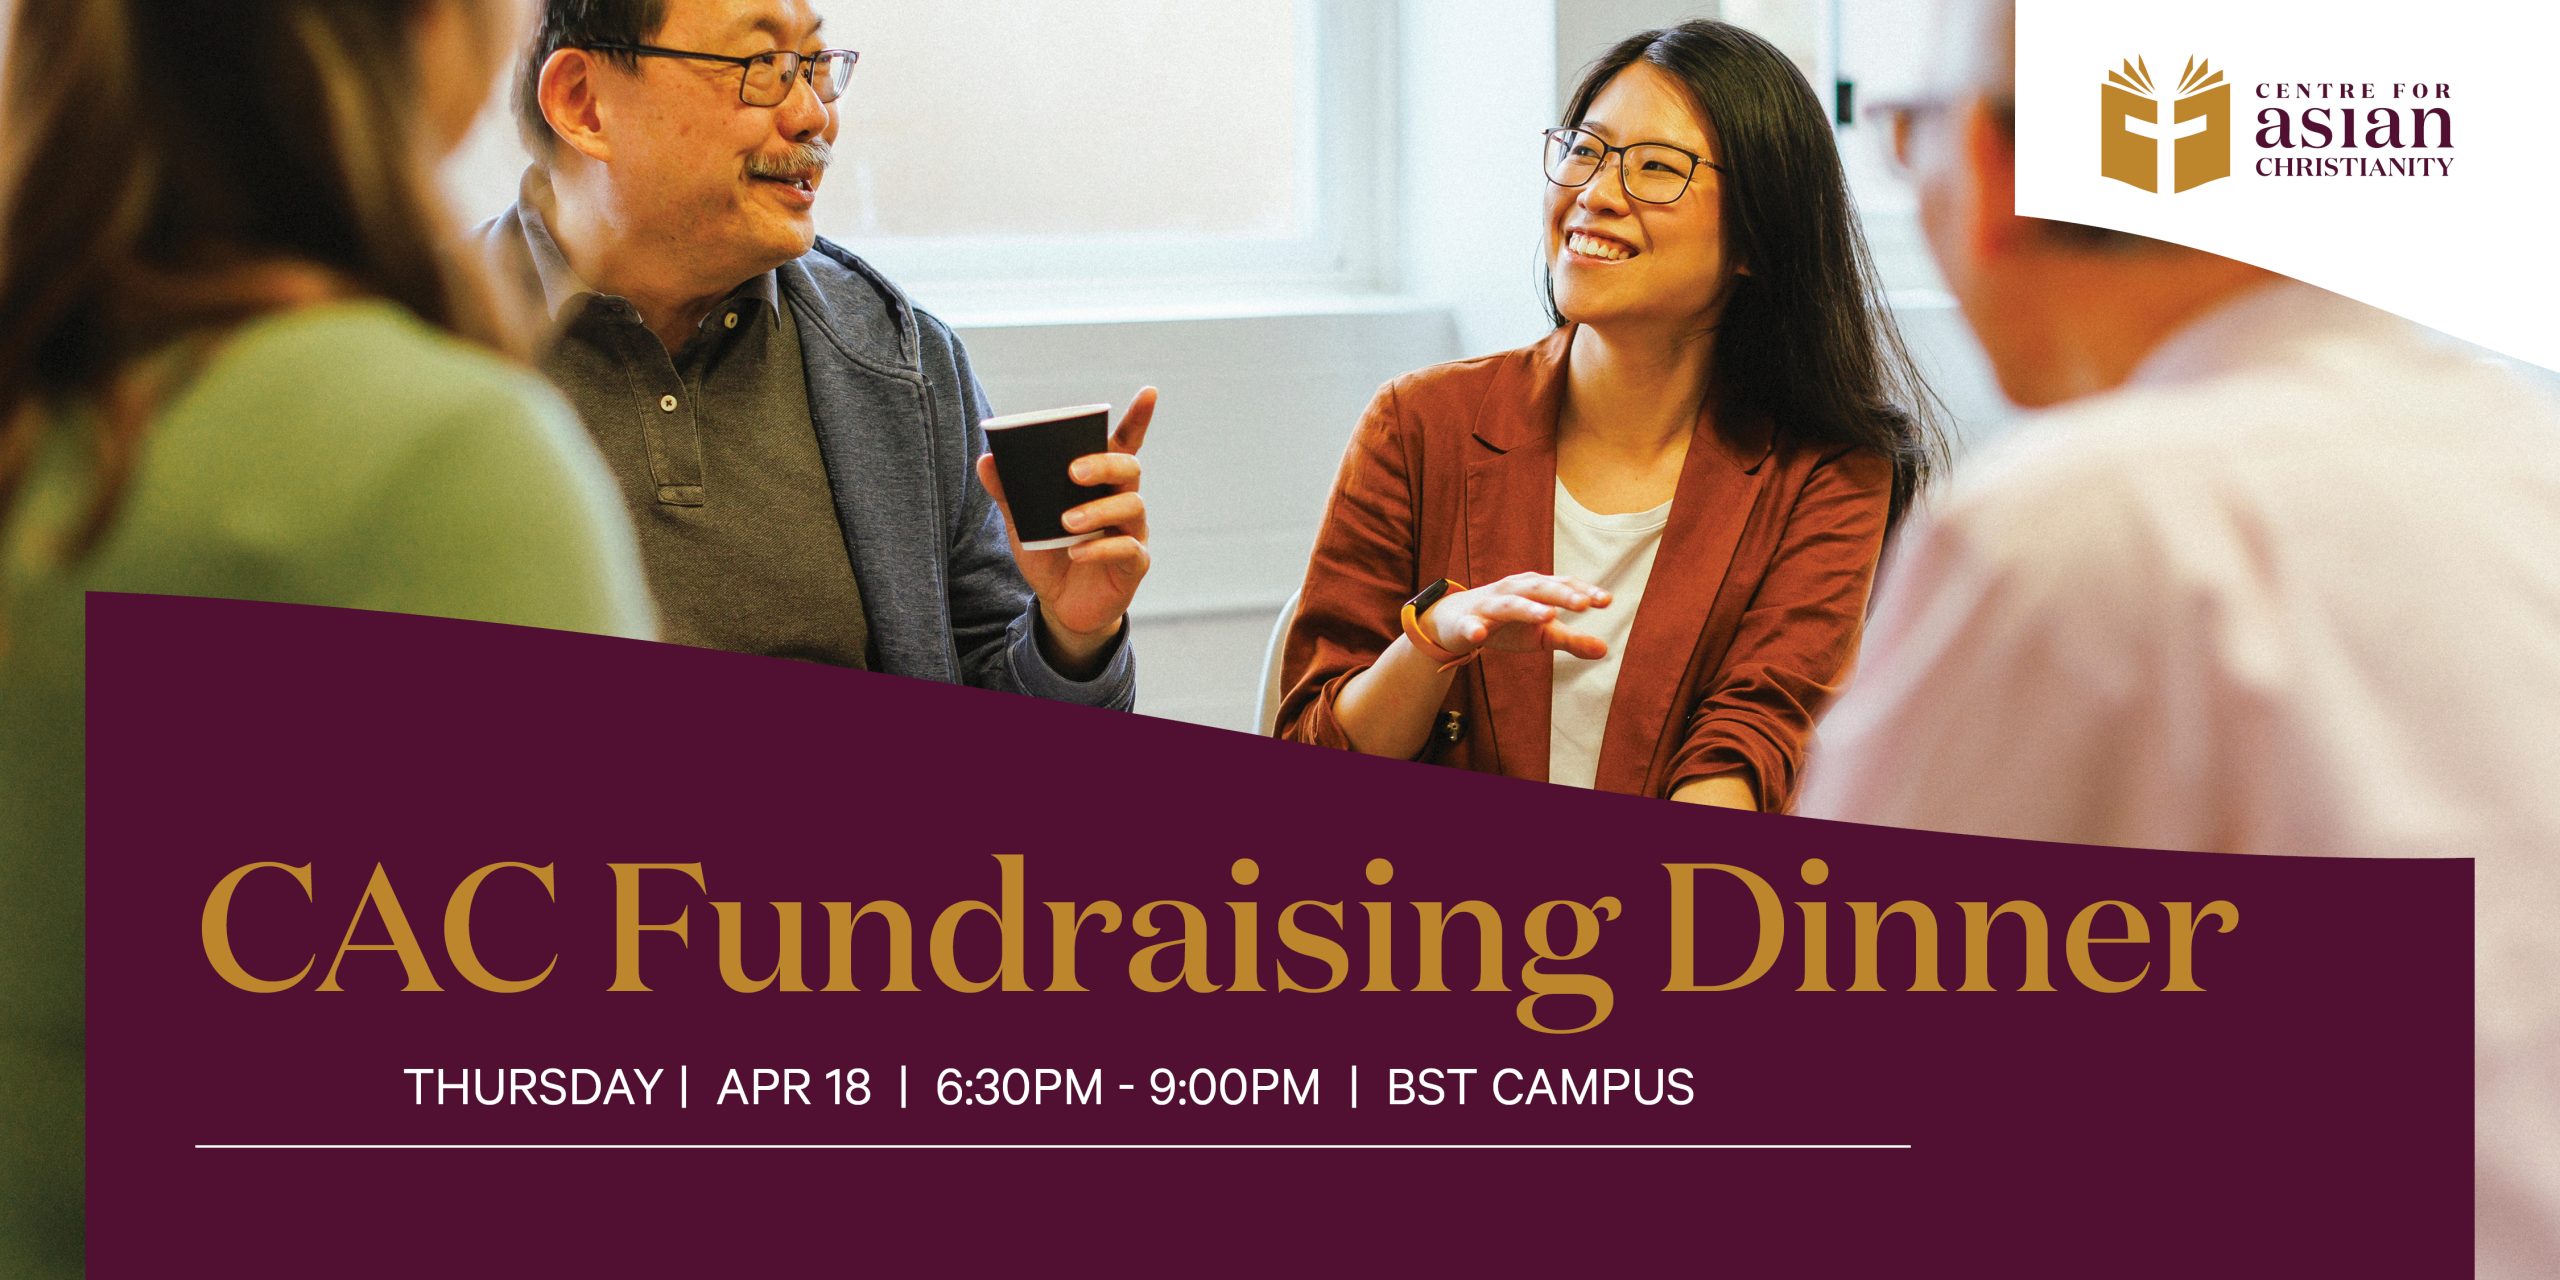 The poster of the fundraising dinner held by the Centre for Asian Christianity (CAC) of Brisbane School of Theology in Australia